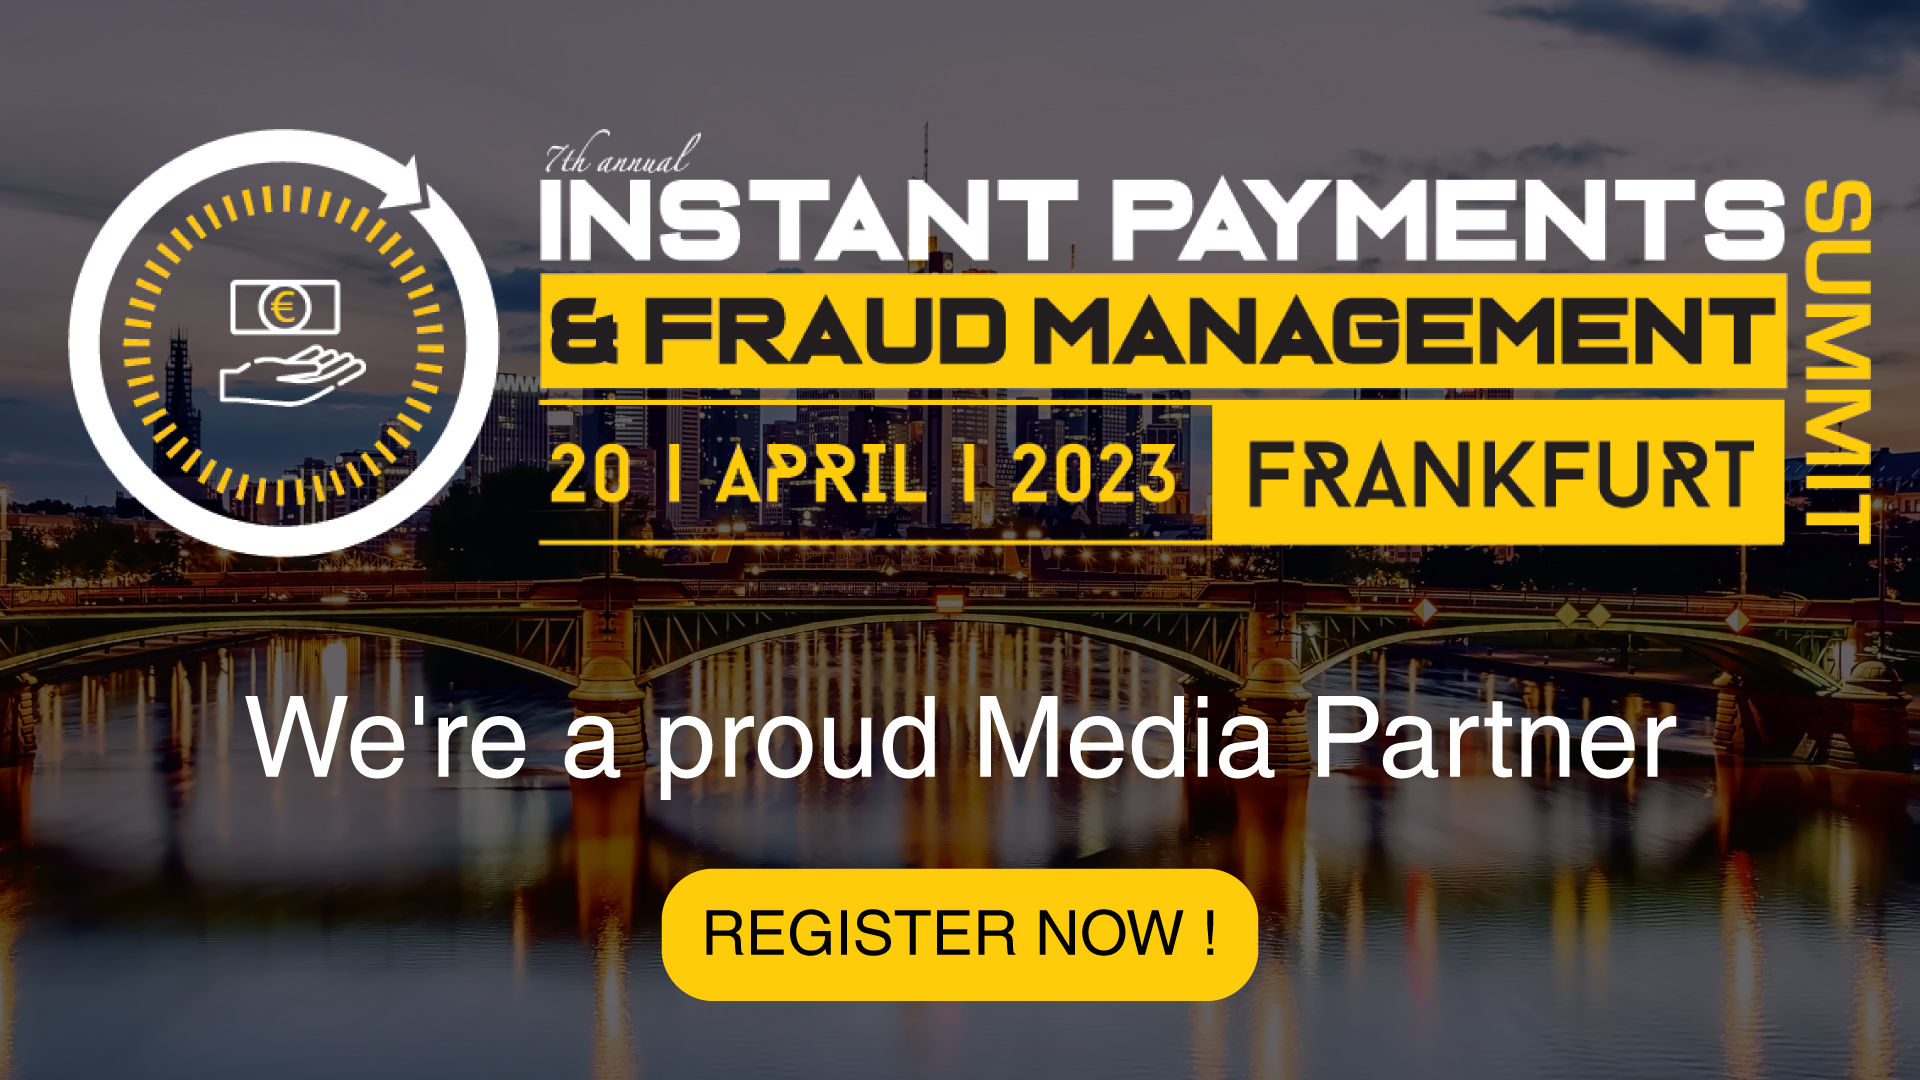 Instant Payments & Fraud Management Summit organized by Kinfos Events